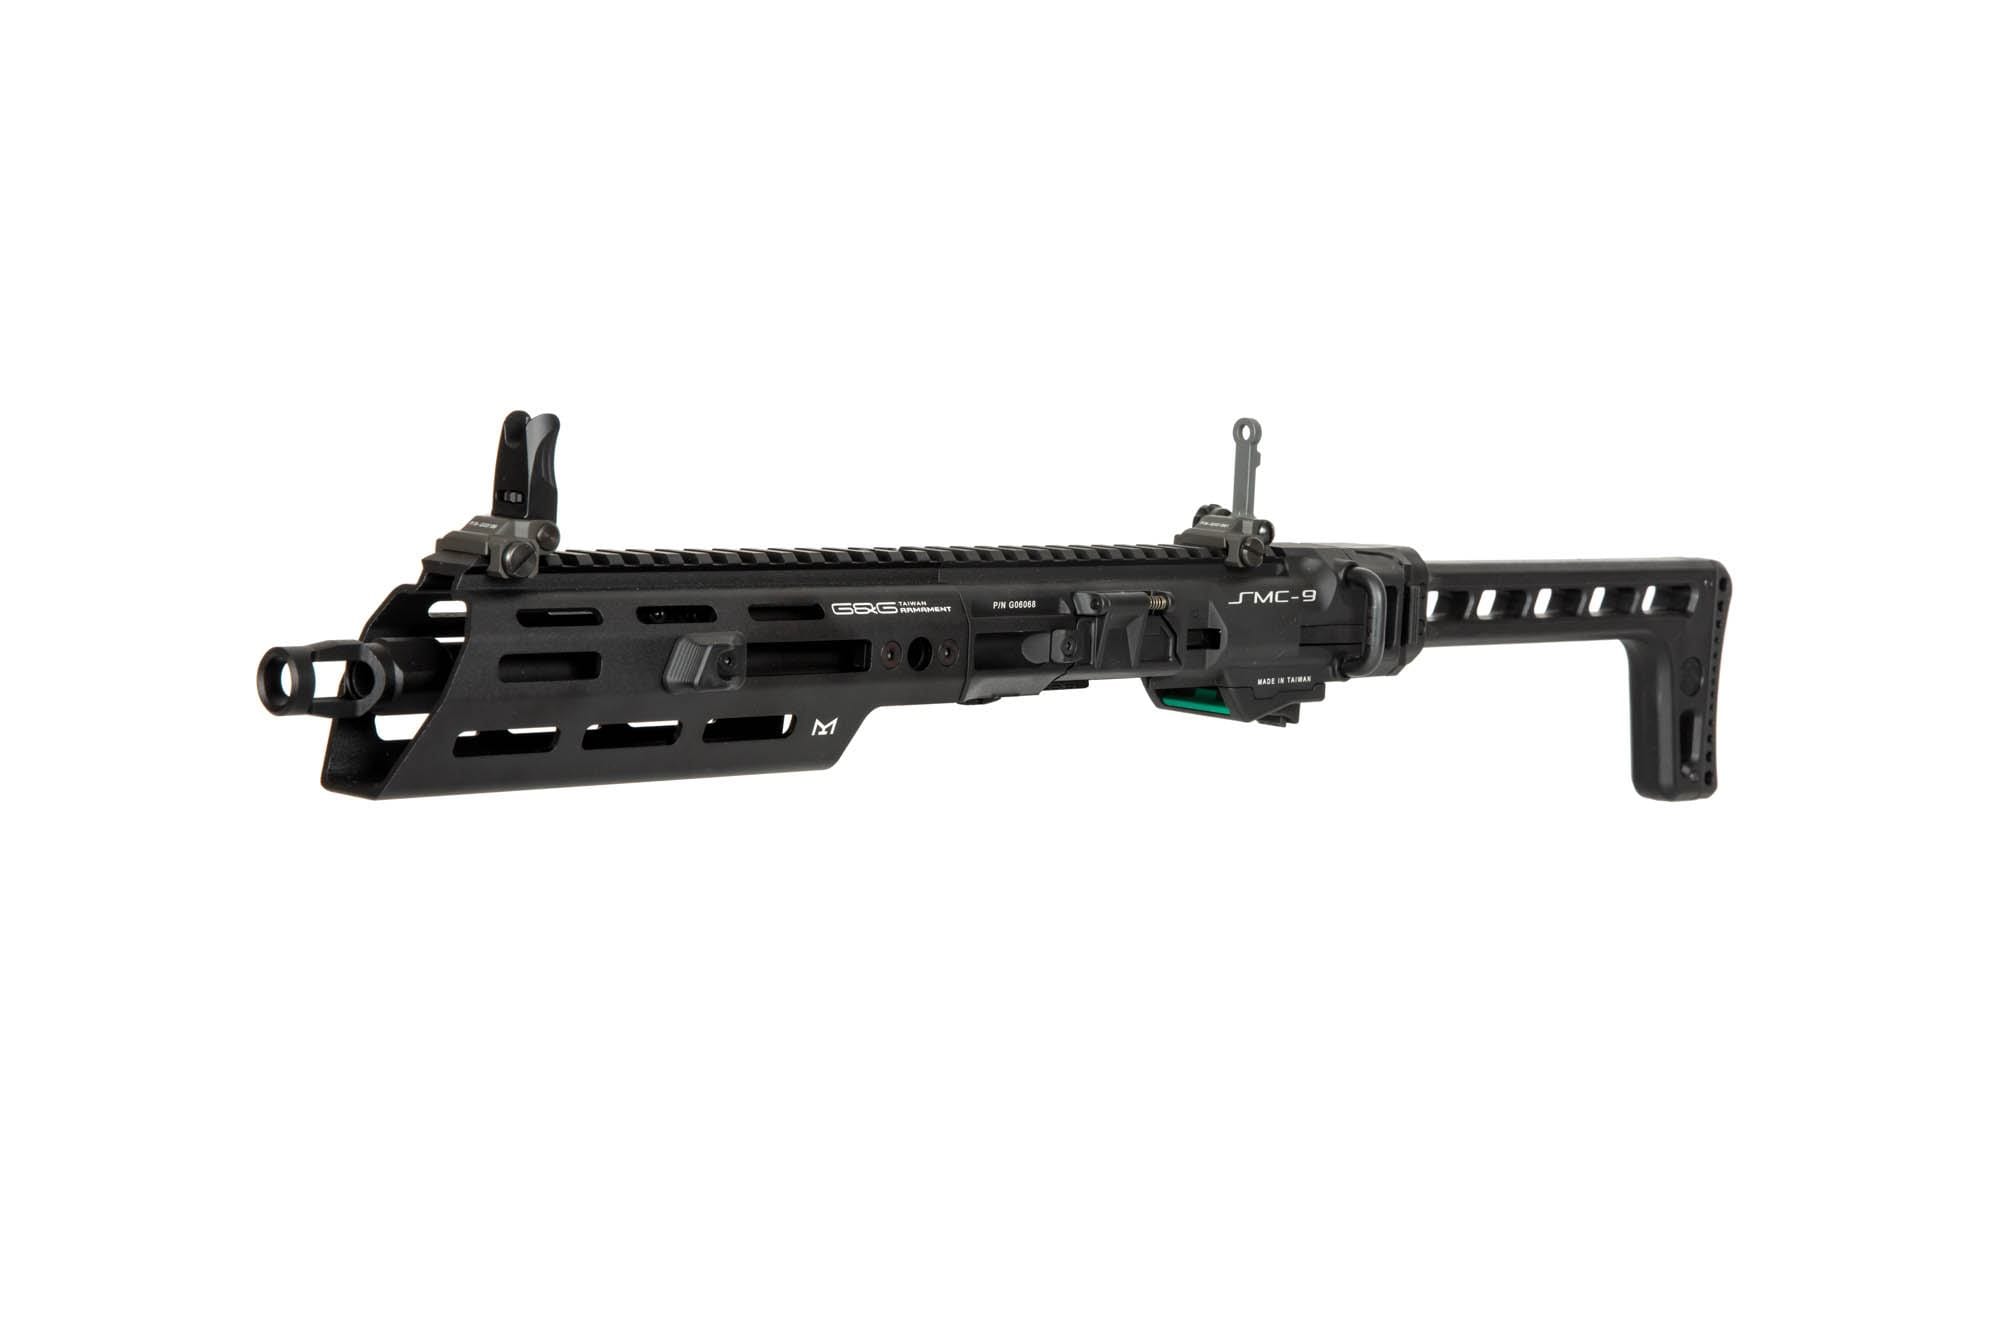 SMC-9 Carbine Kit for GTP9 by G&G on Airsoft Mania Europe